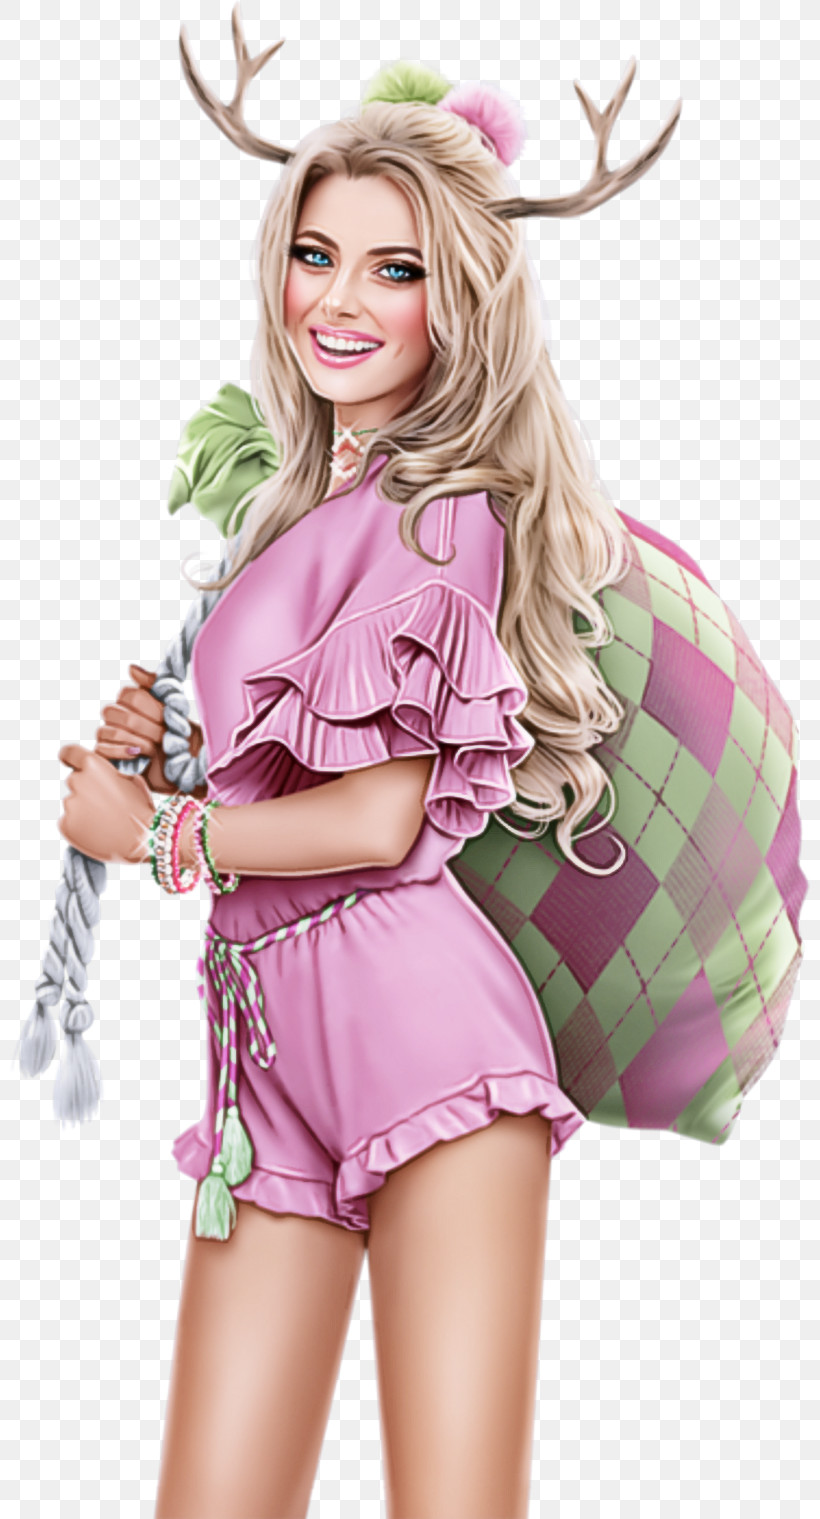 Clothing Pink Blond Shorts Costume, PNG, 800x1519px, Clothing, Blond, Costume, Model, Photo Shoot Download Free